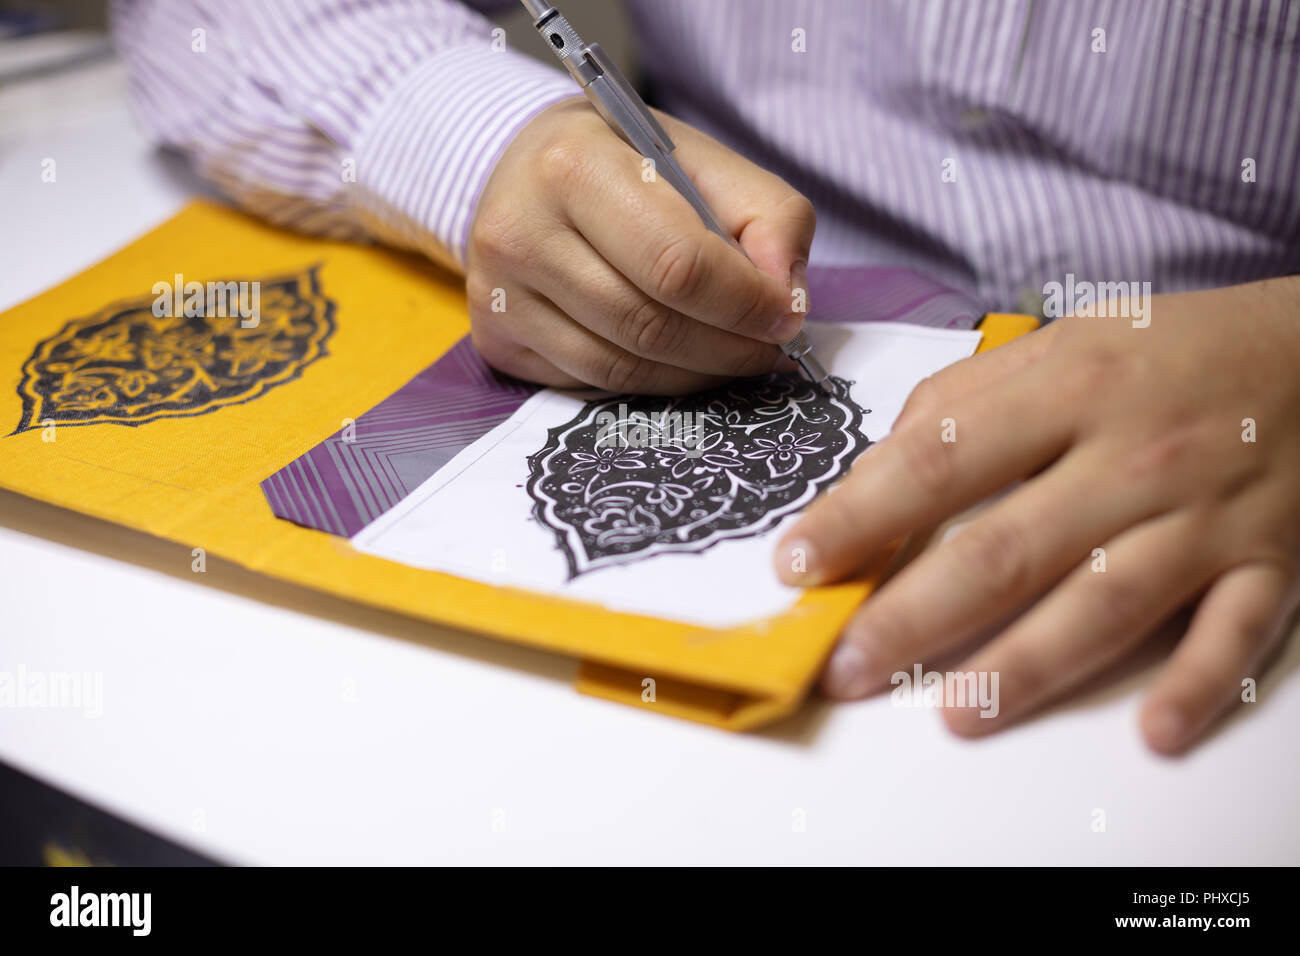 Book binder hand illustrating book covers in his workshop calligraphic